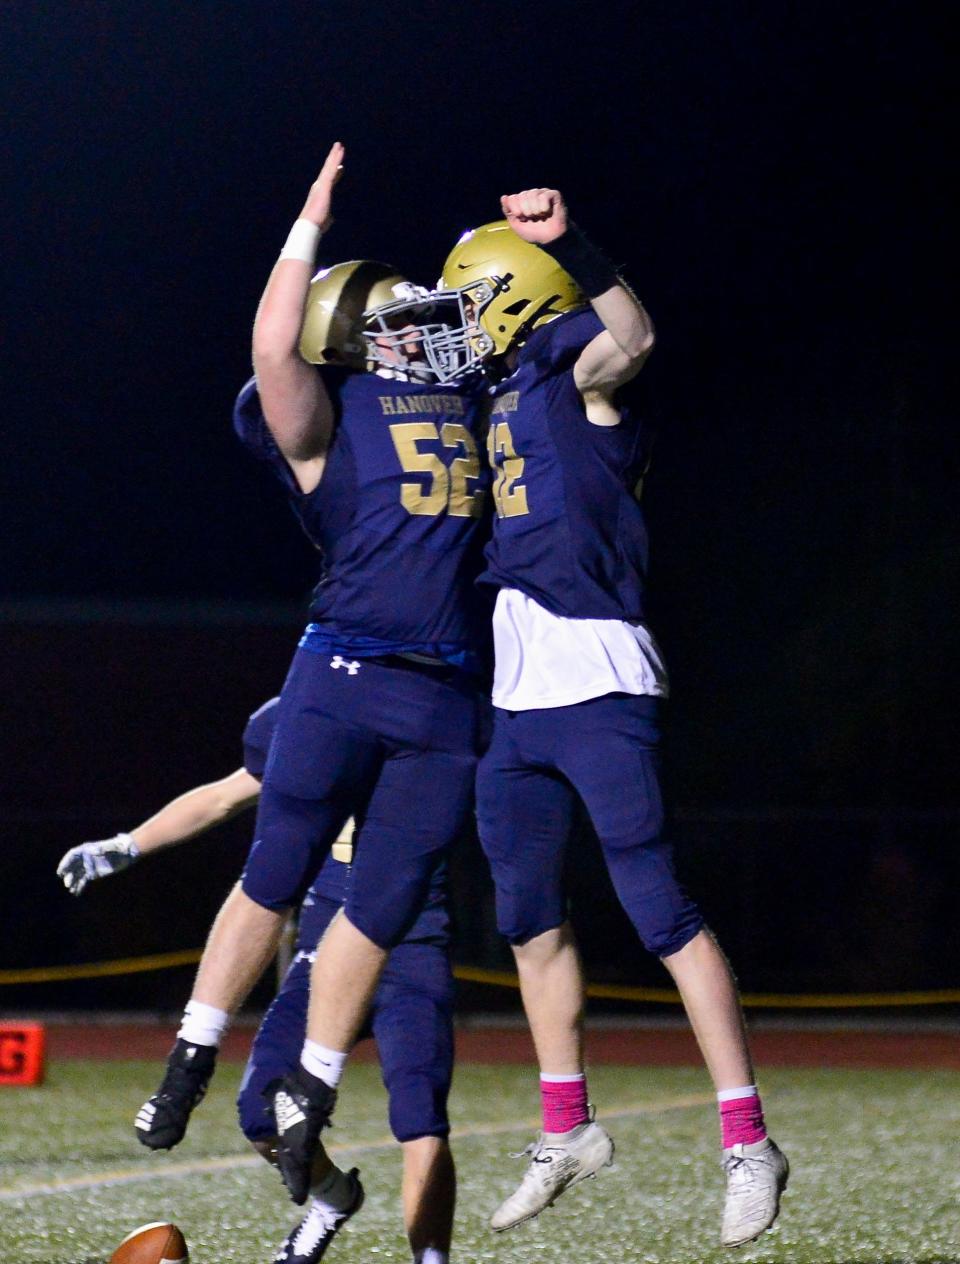 Hanover's Chase Brewster and Kyle McEachern celebrate a touchdown during Friday night's game against North Quincy held at Hanover Oct. 25, 2019.

Mike Borden/ for The Patriot Ledger